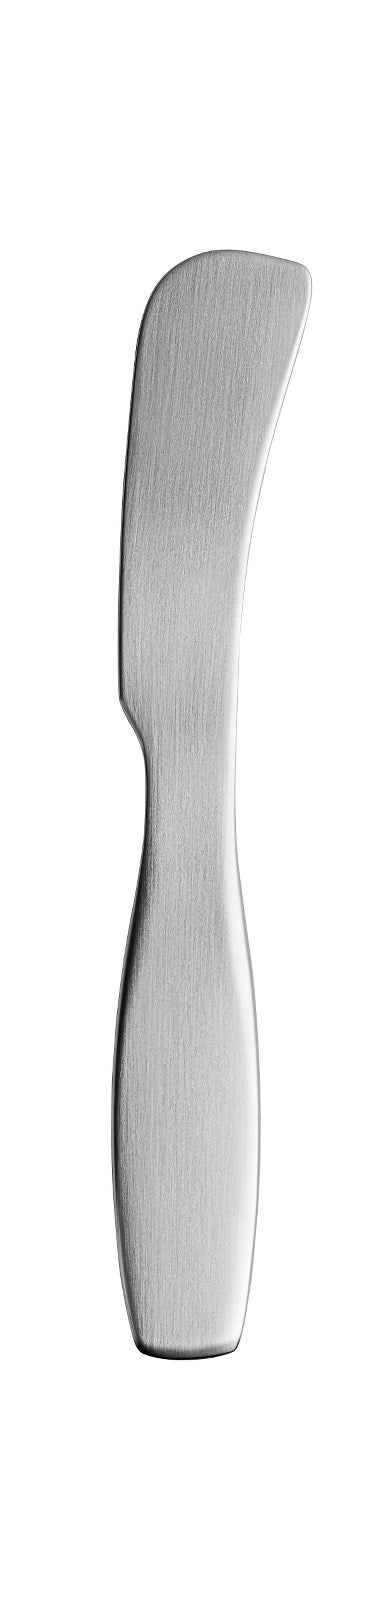 product image for Collective Tools Flatware design by Antonio Citterio for Iittala 2